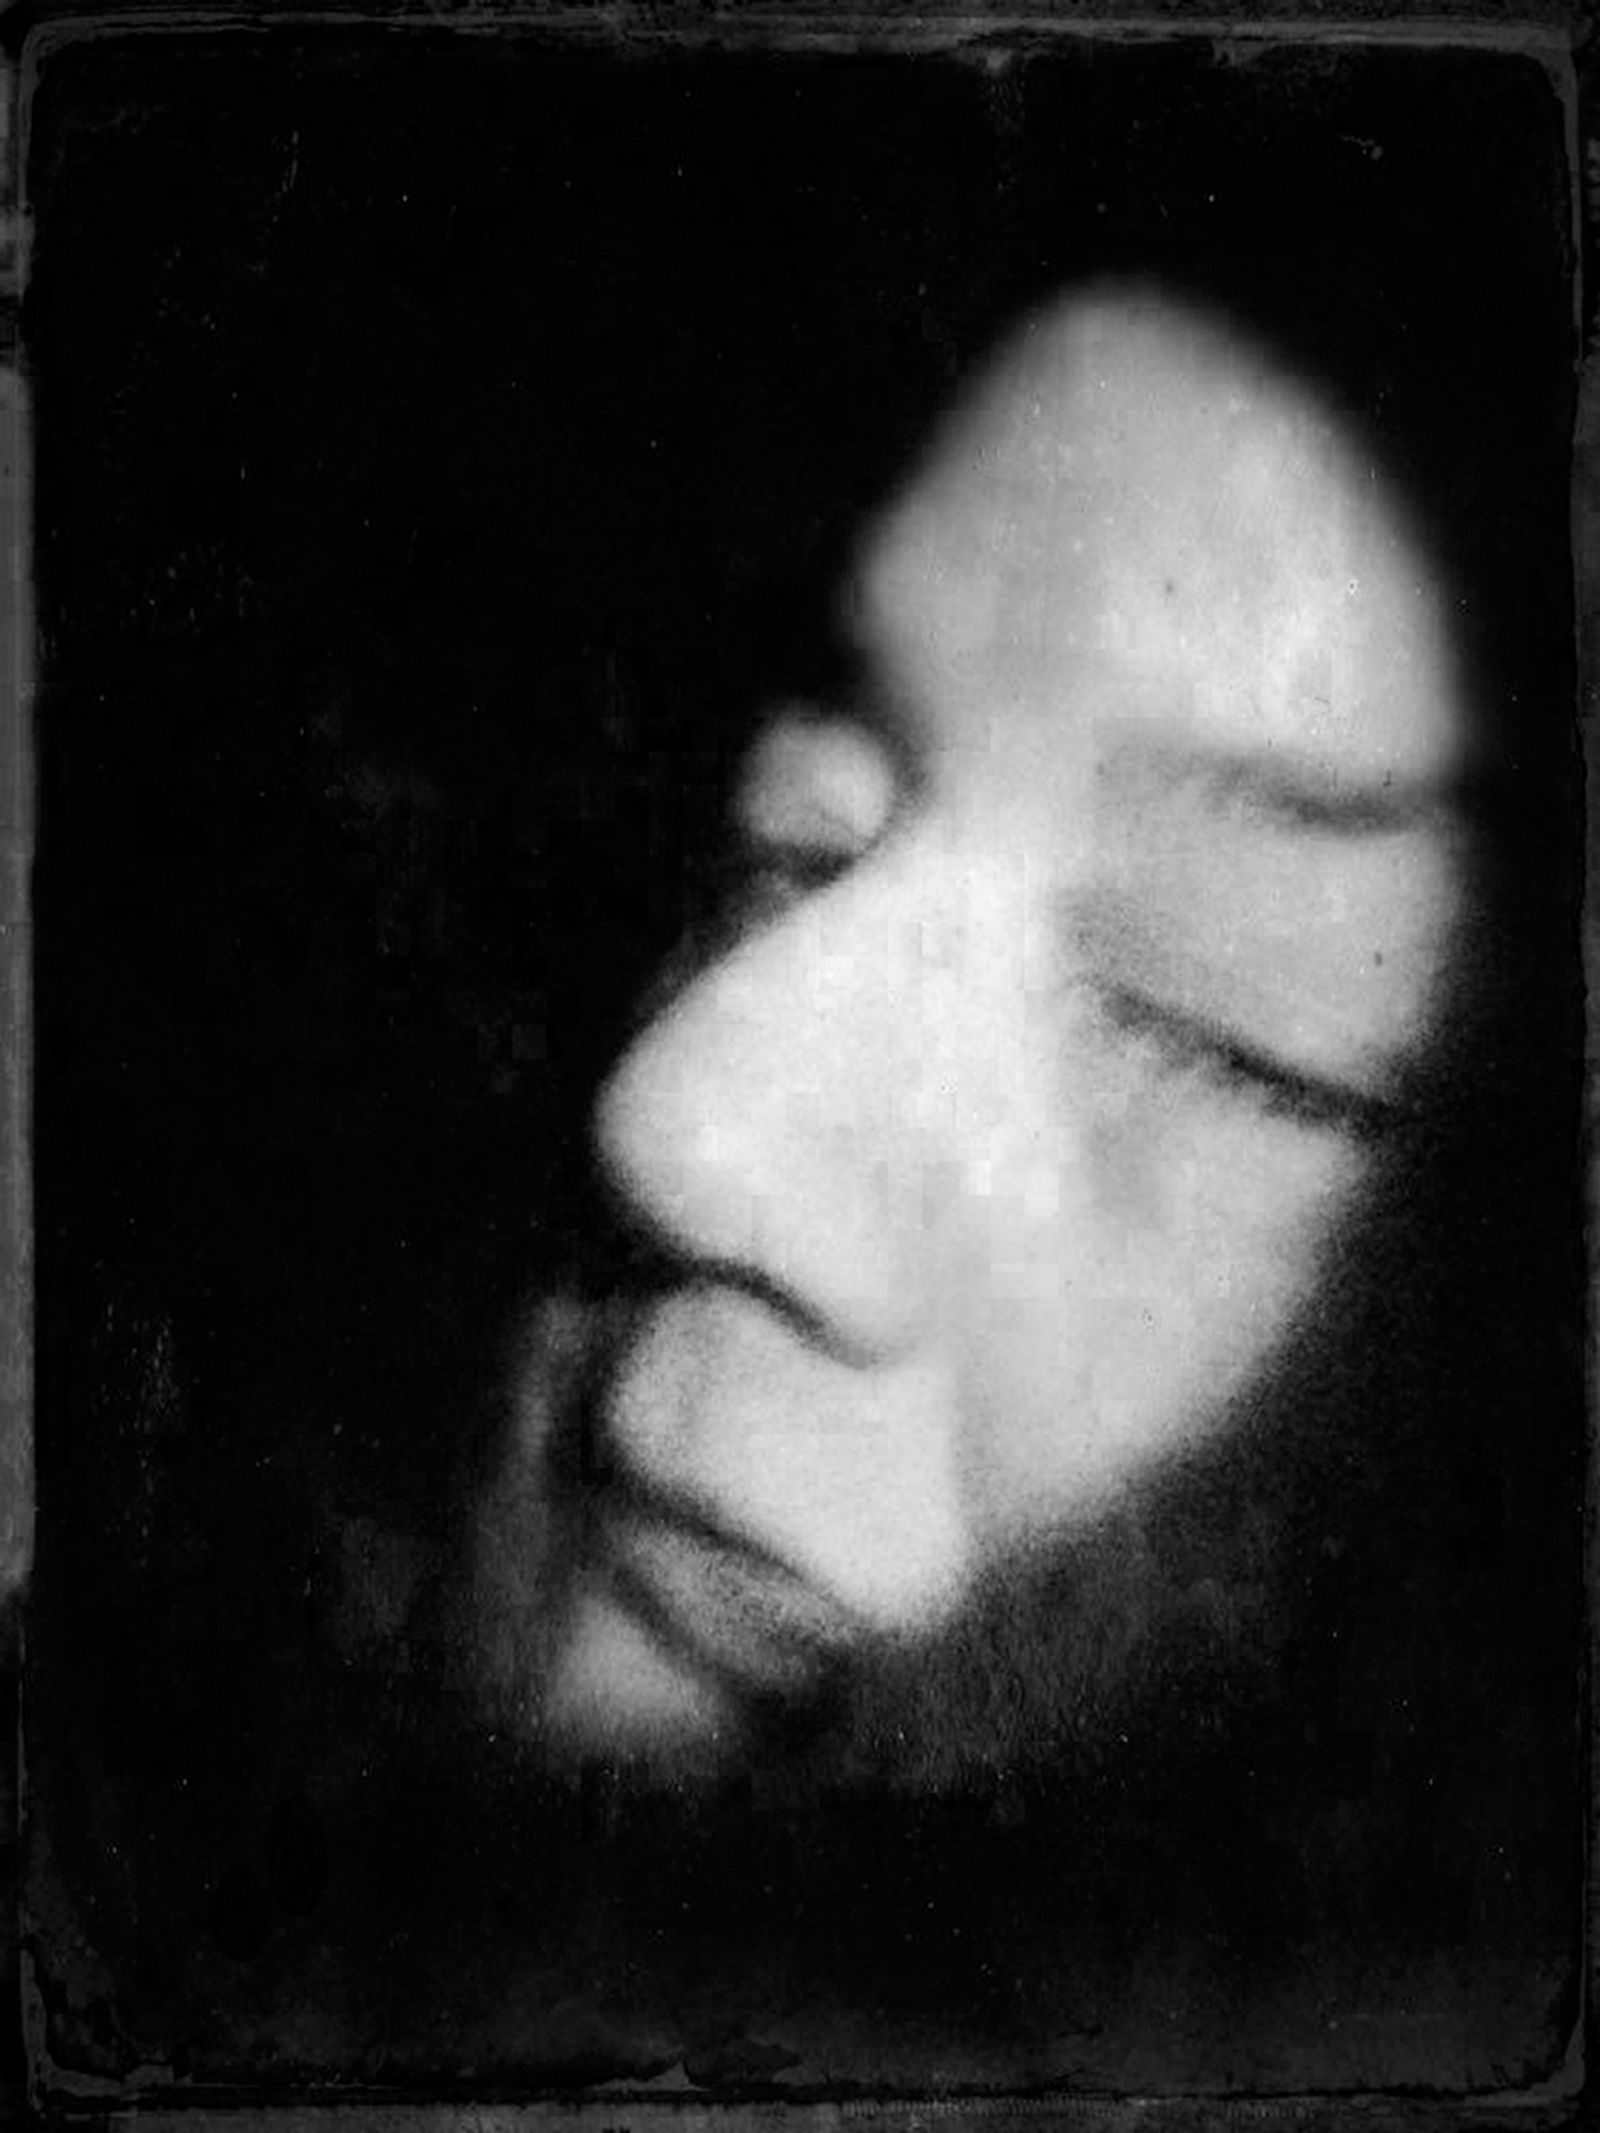 © Diane Fenster - Image from the A Long History Of Dark Sleep photography project